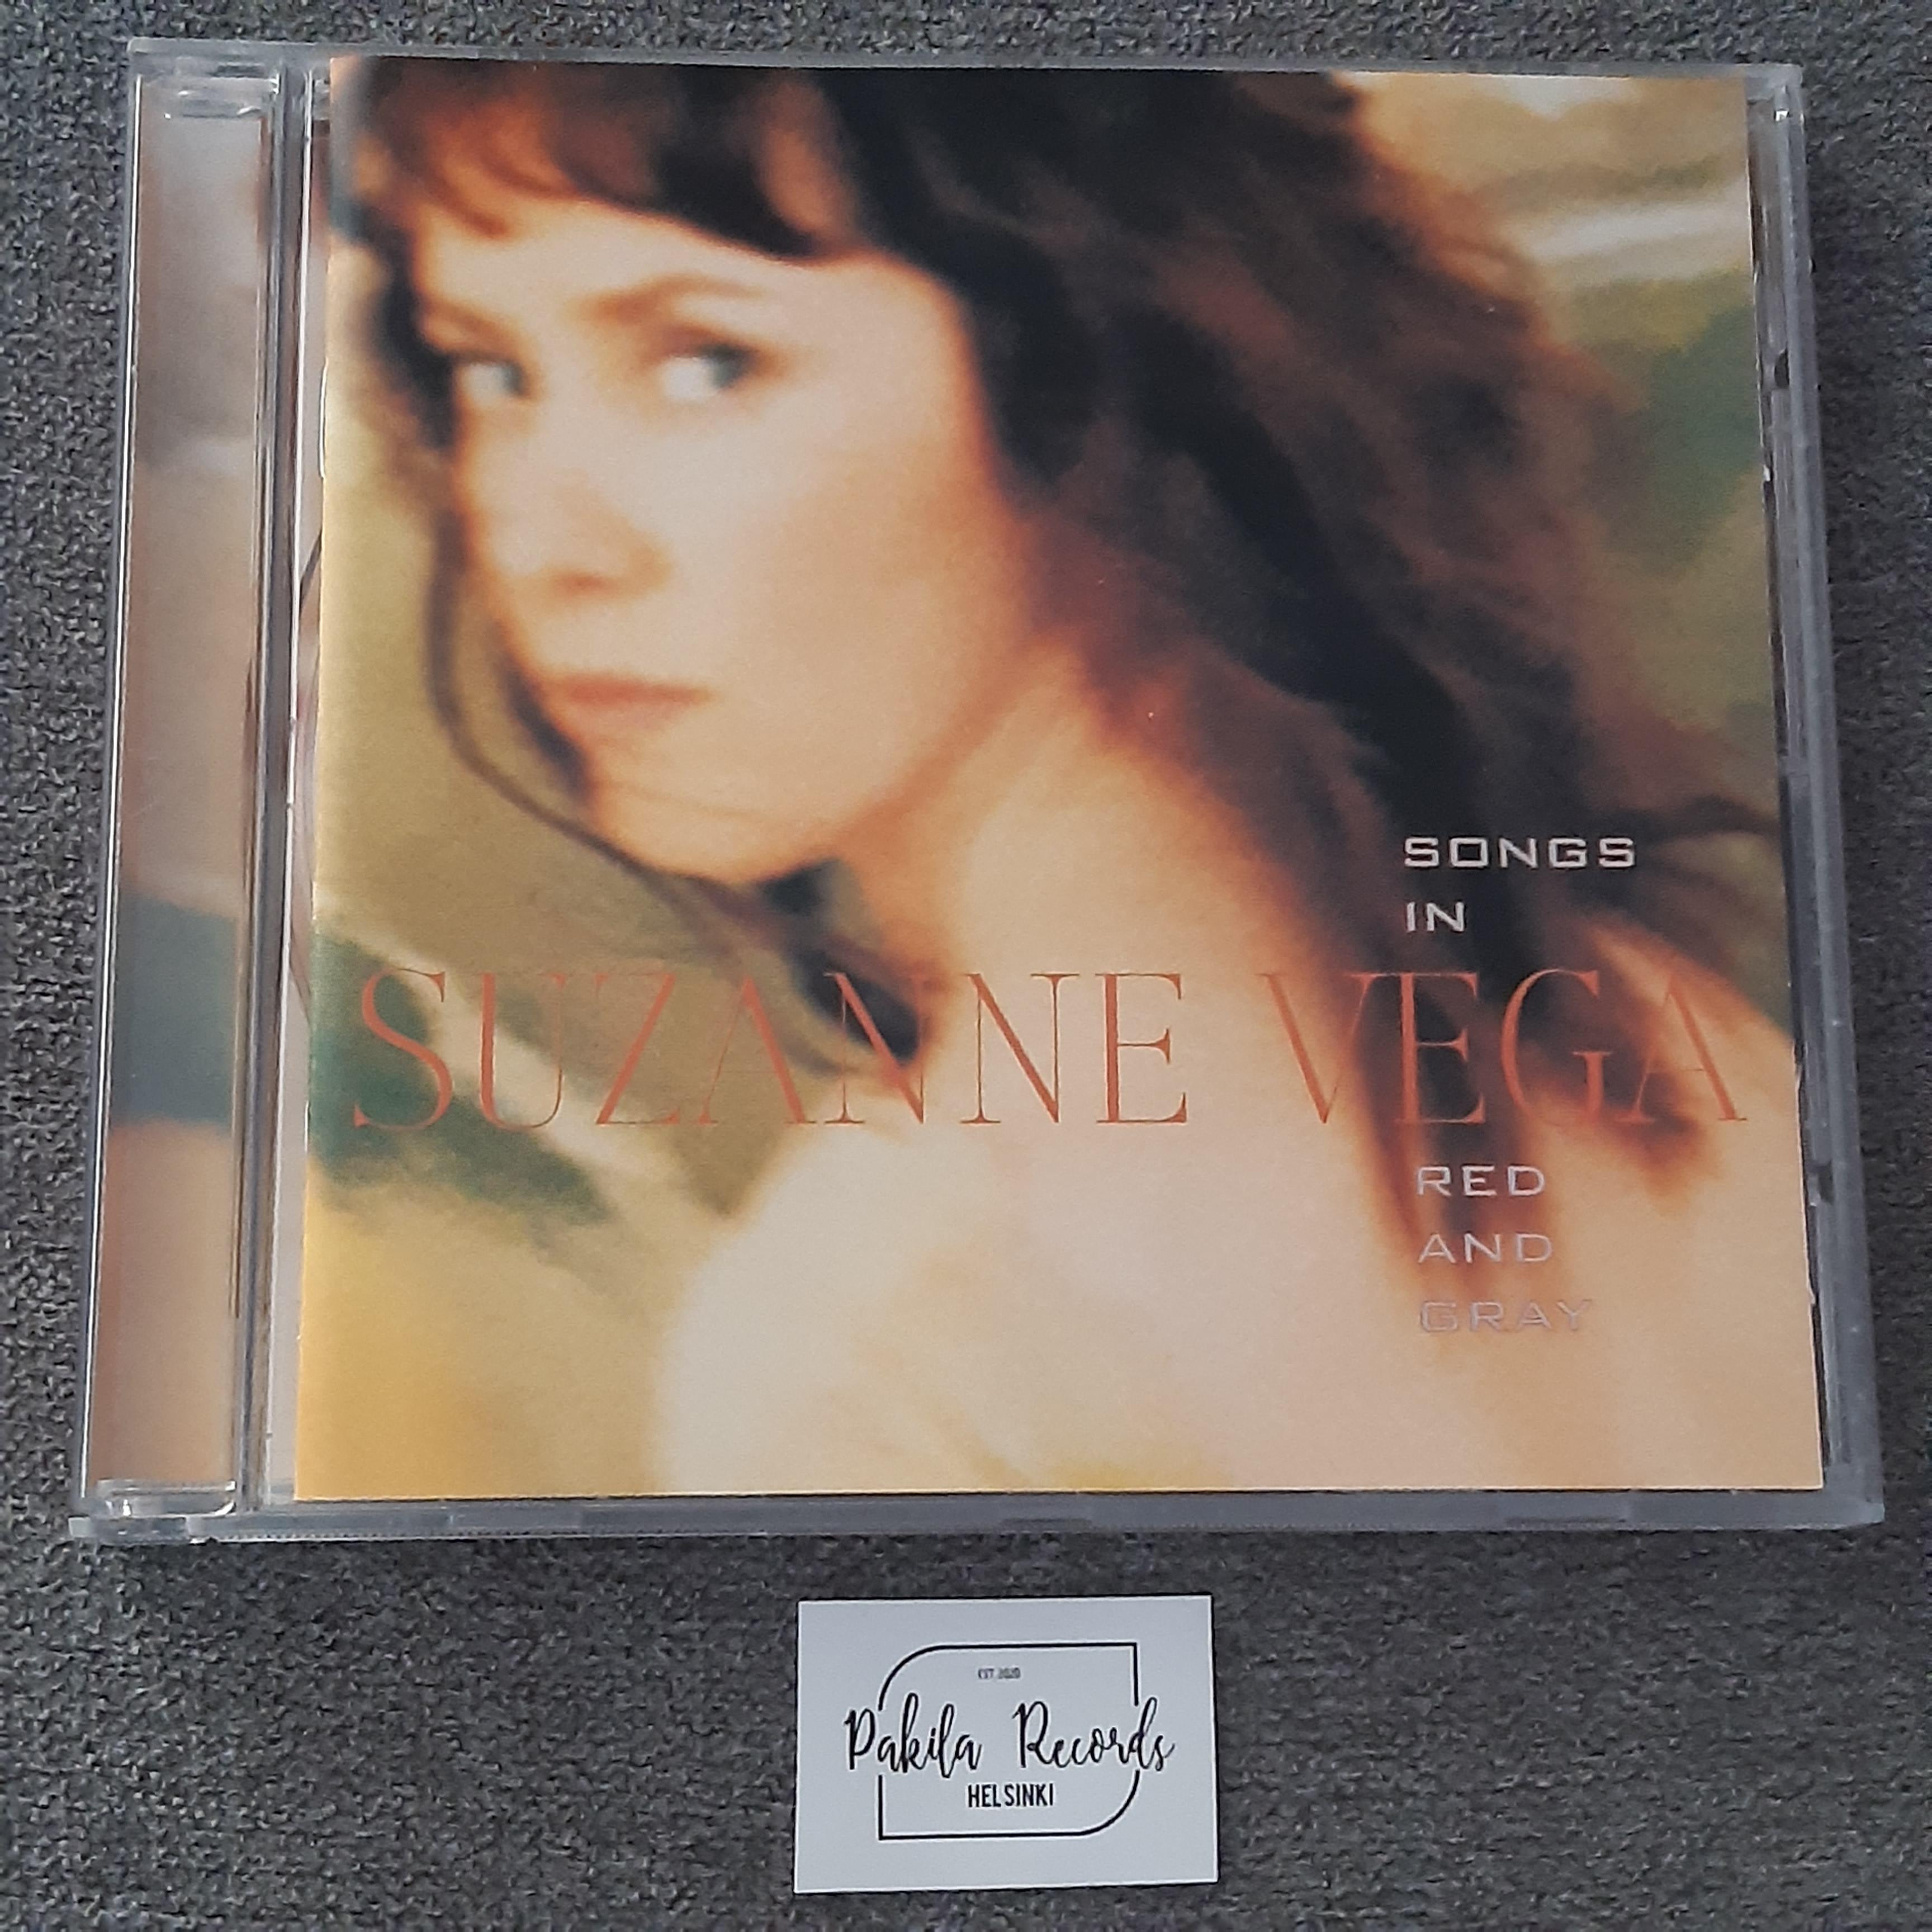 Suzanne Vega - Songs In Red And Gray - CD (käytetty)